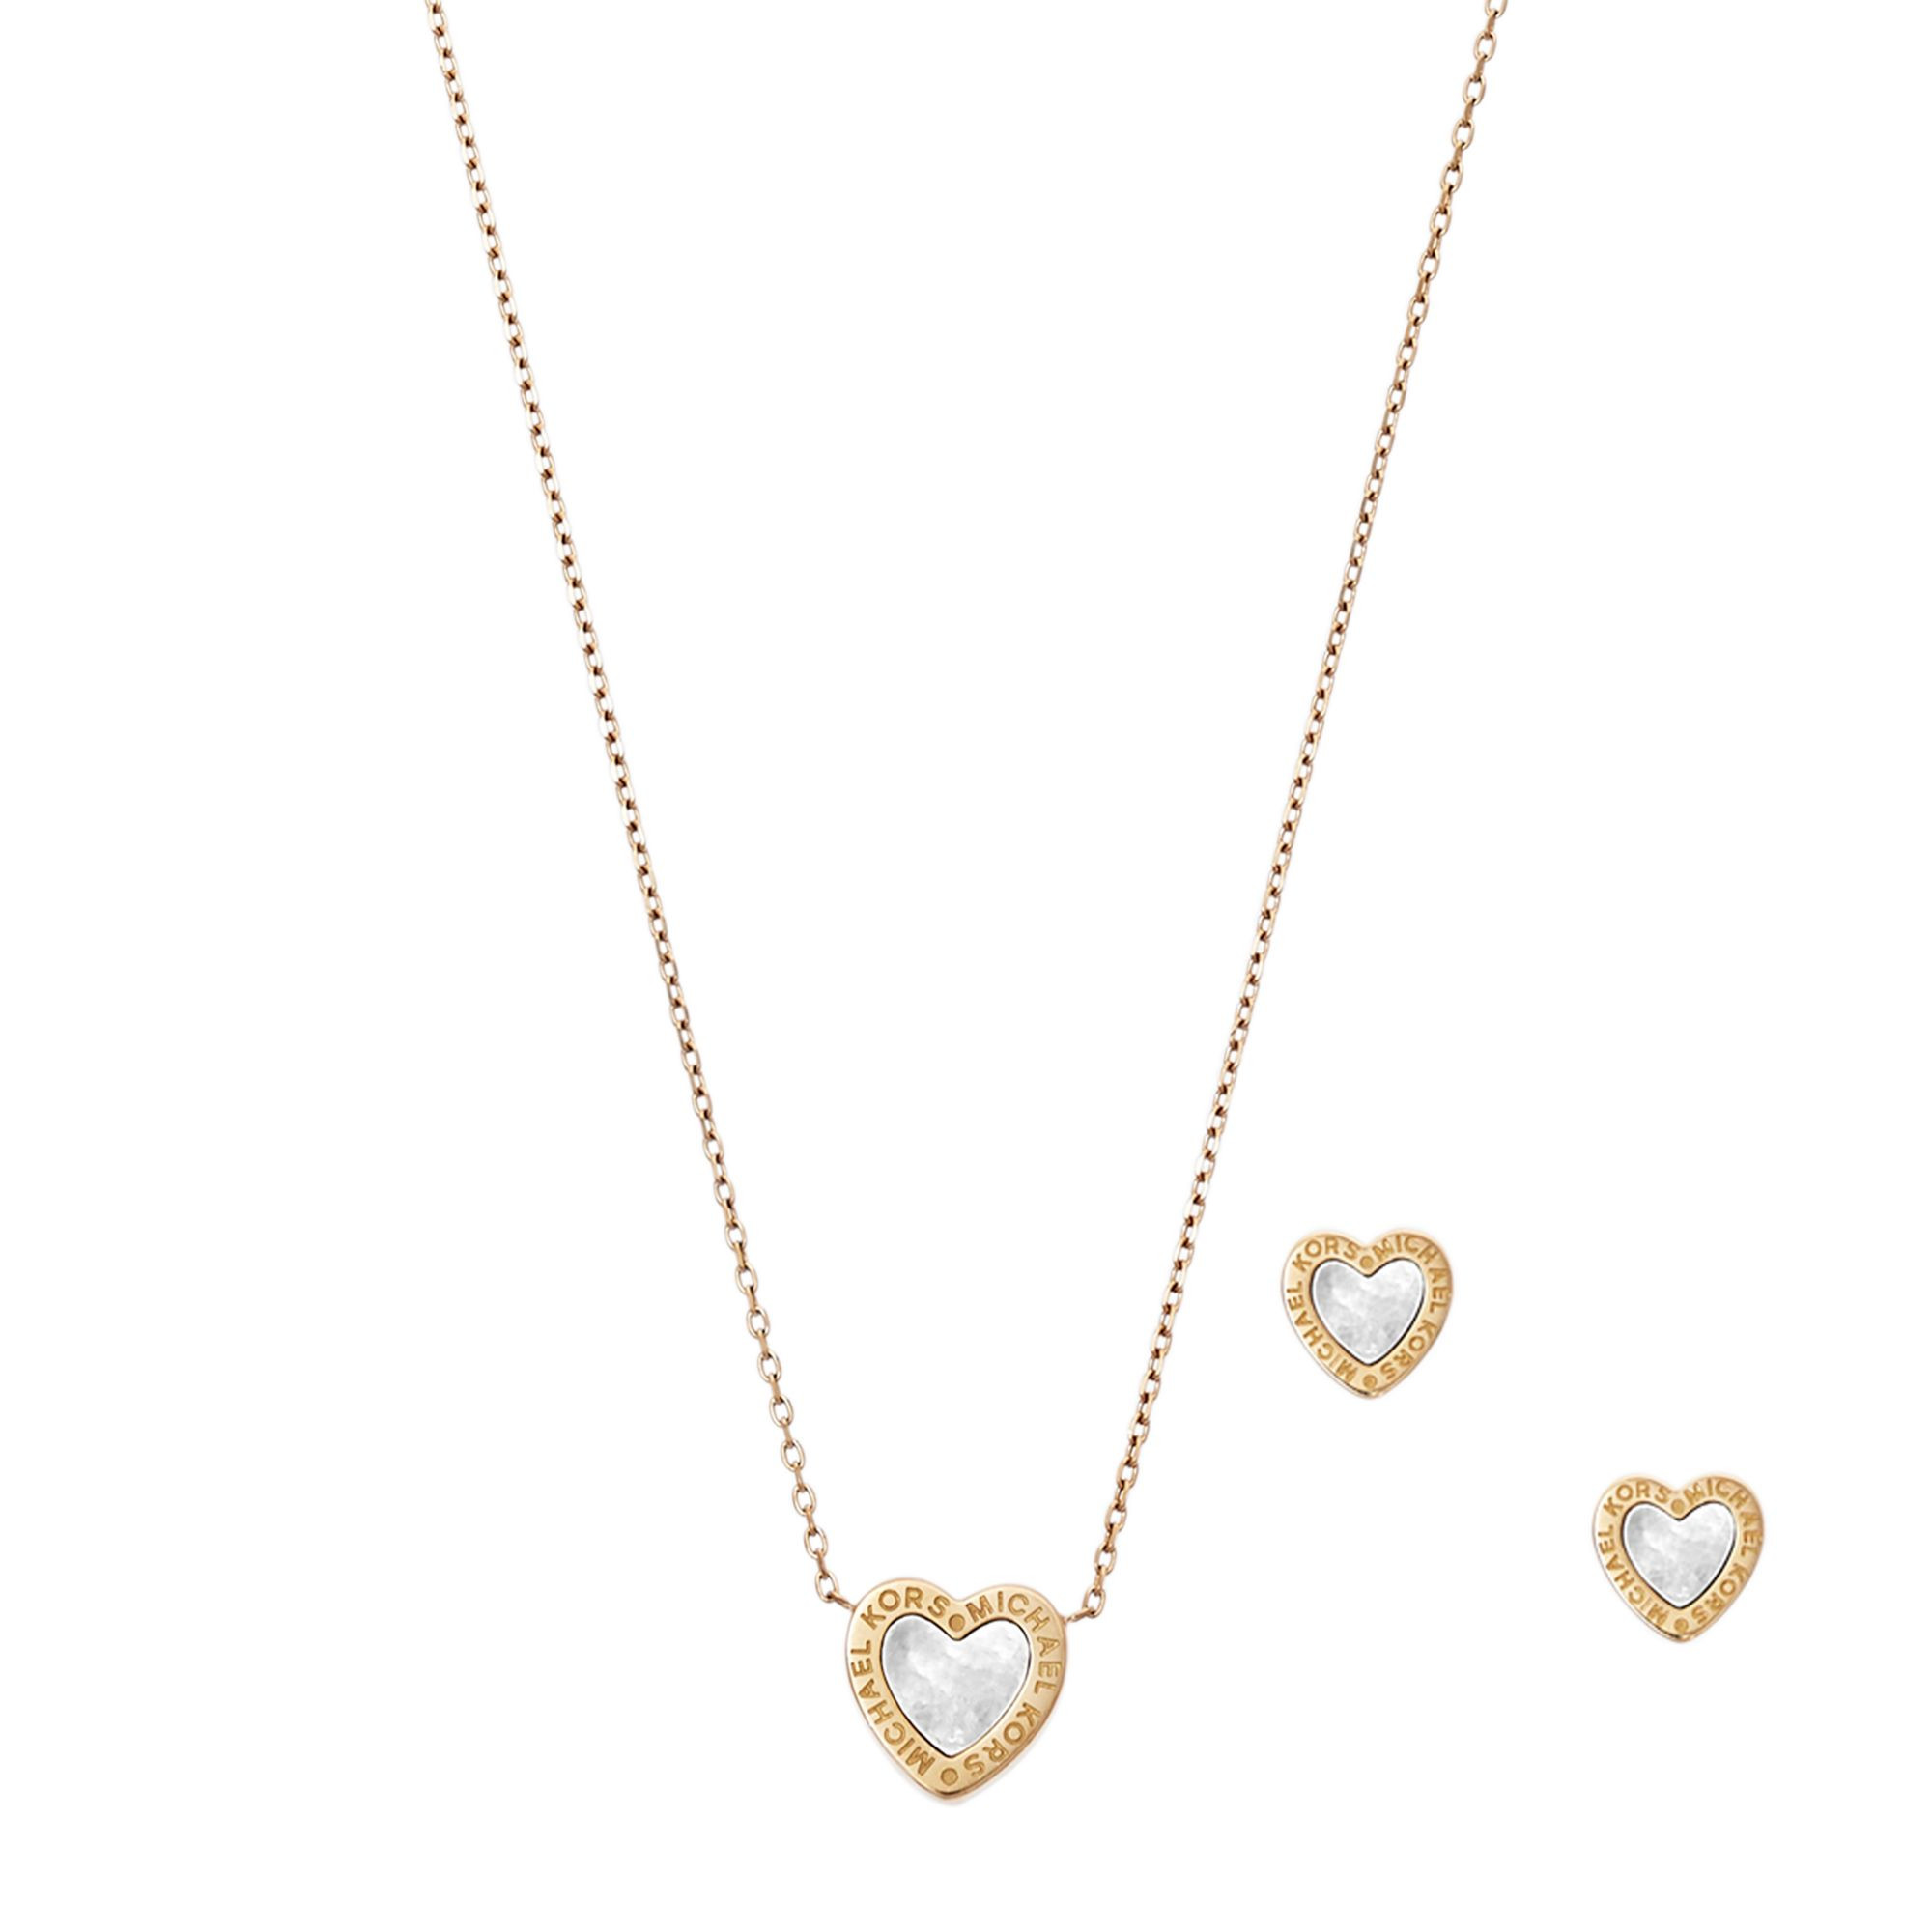 Michael Kors Necklaces
 Michael kors Gold tone Heart Necklace And Earrings Set in